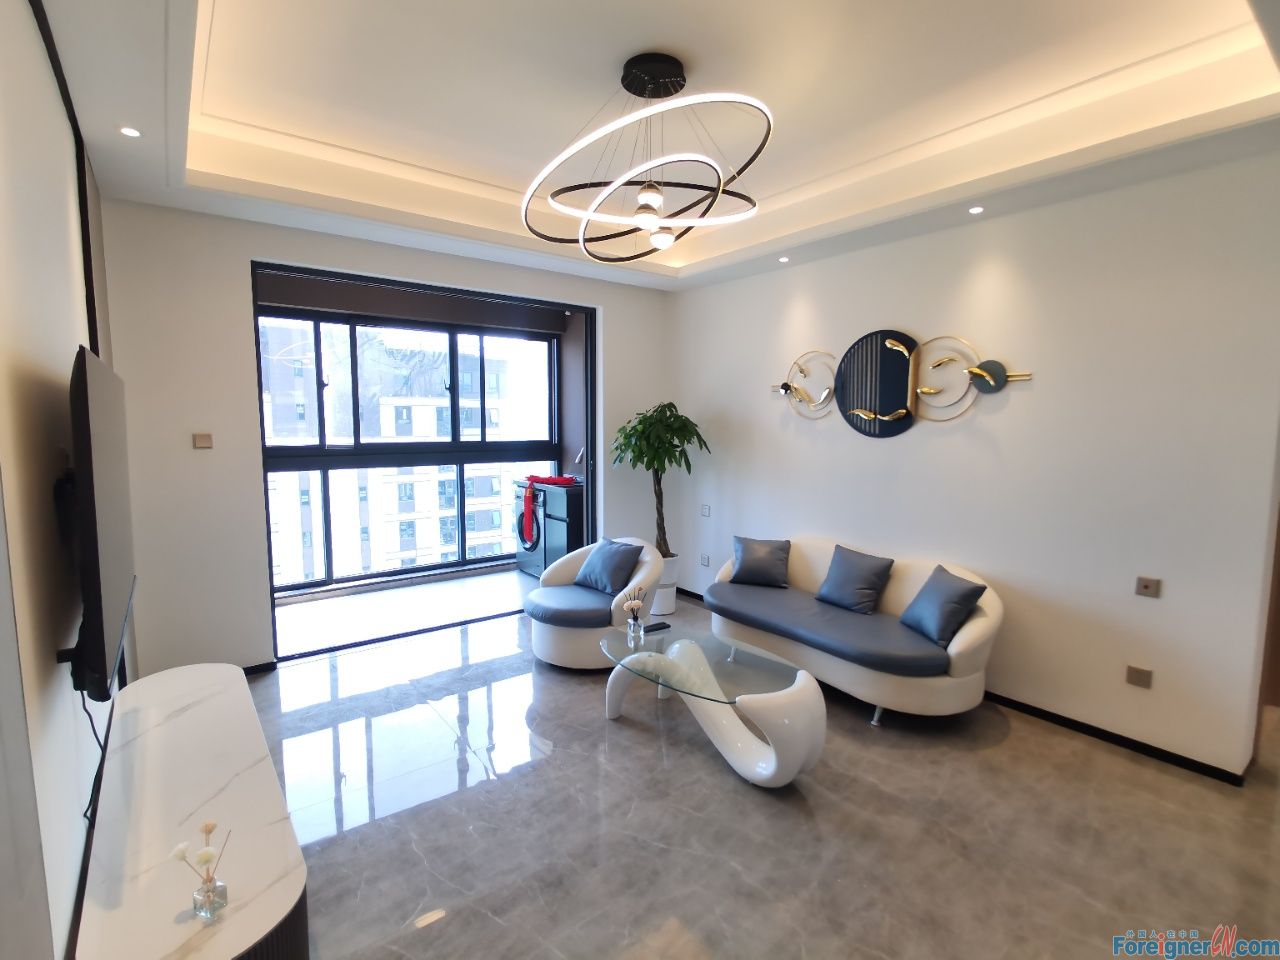 Terrific!! Glory Mansion apartment Rent in Suzhou/3 bedrooms, 1 study room and 2 bathrooms/Brand new/central AC and floor heating/big balcony/Subway Station Nearly/